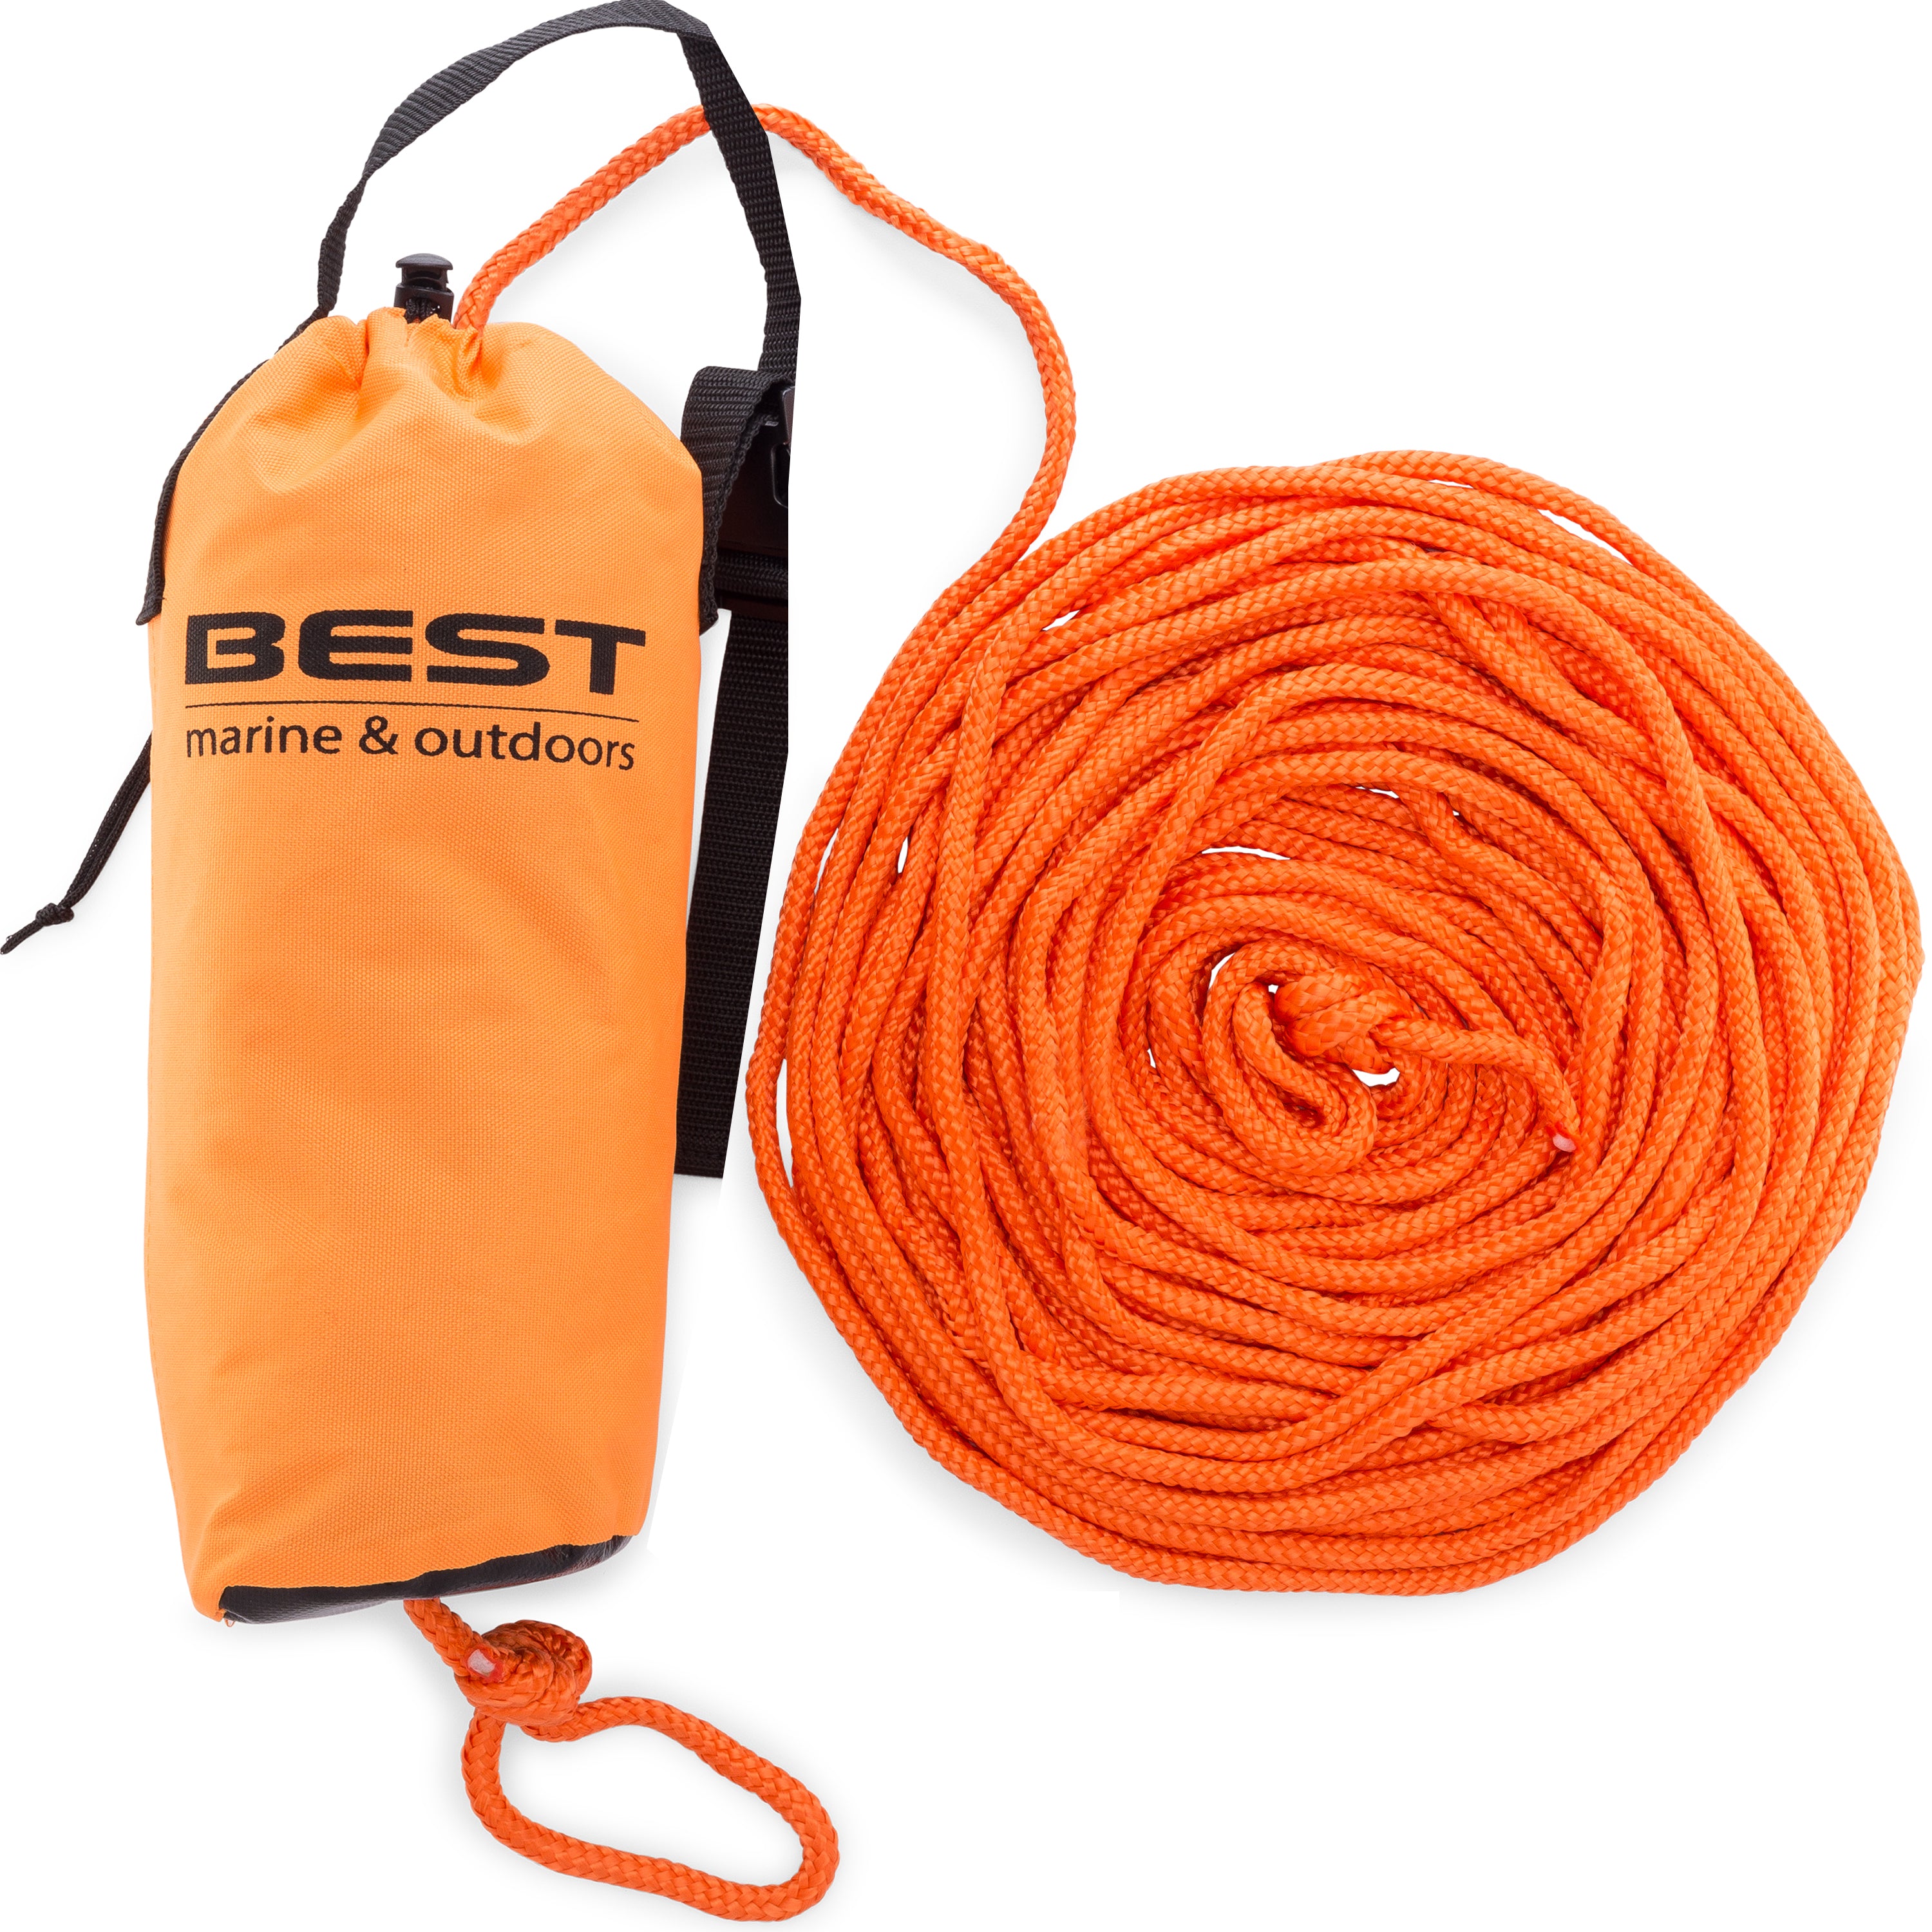 Best Marine and Outdoors Emergency Throw Rope Rescue Bag - Throwable Safety Device for Kayaking & Boating